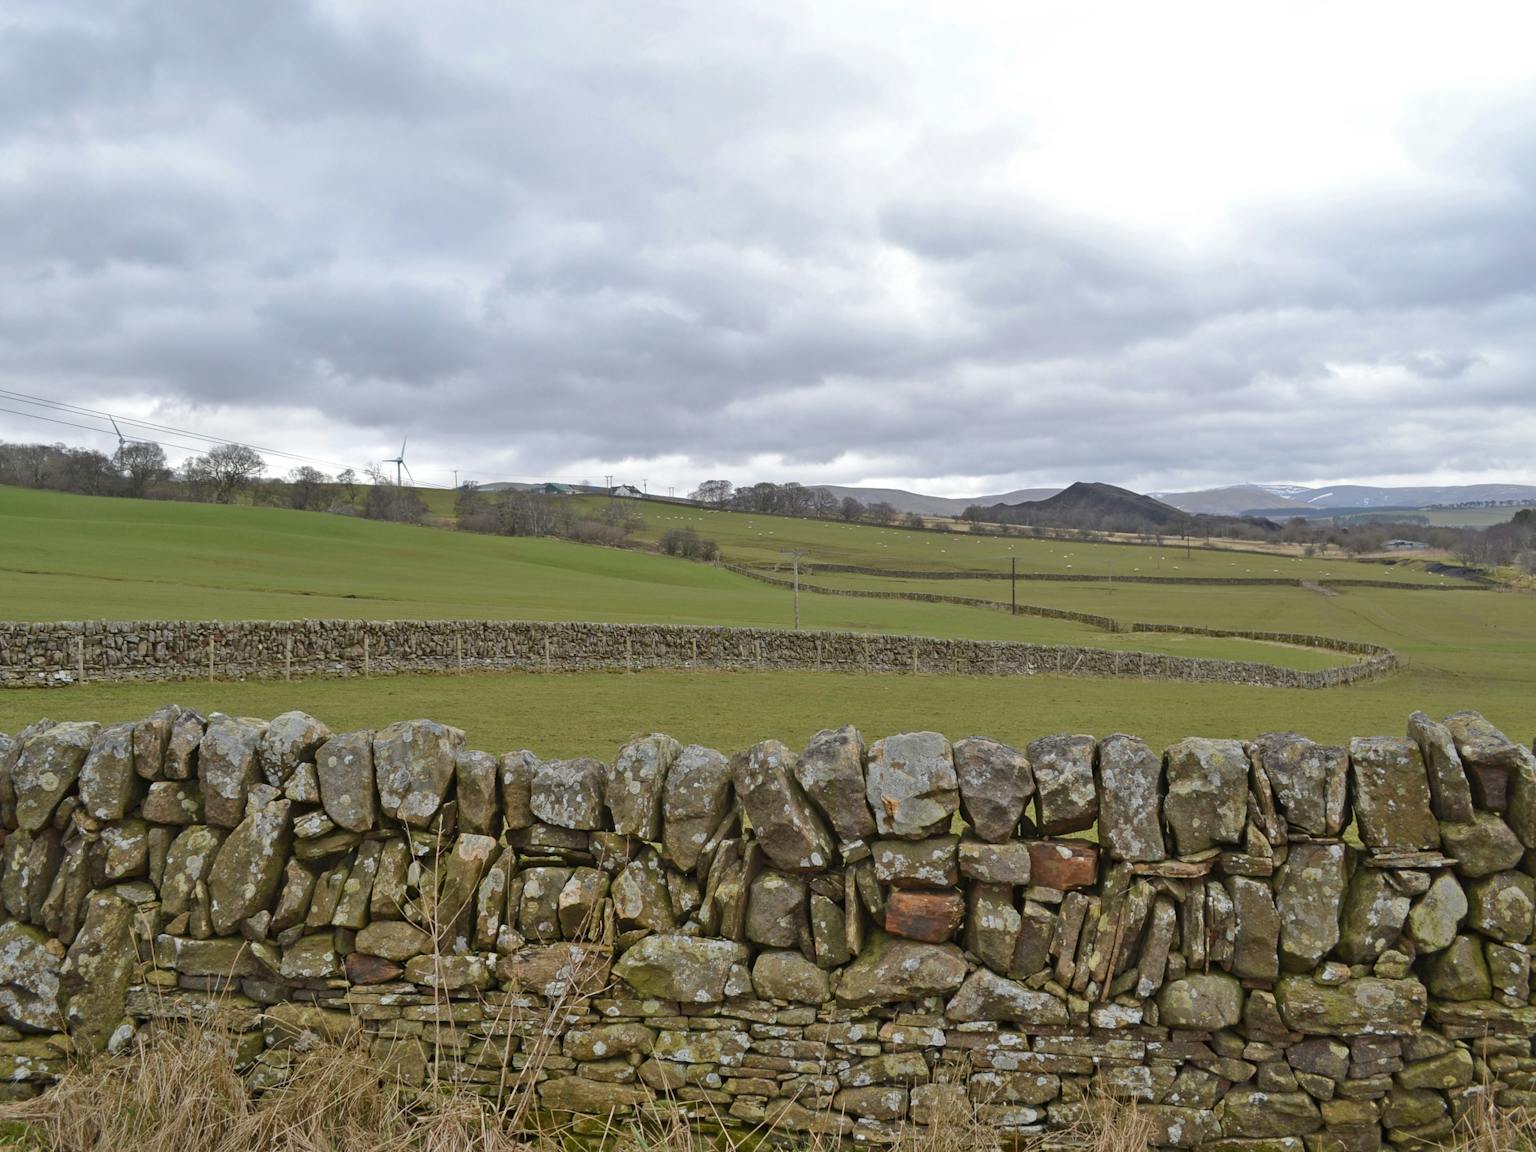 Countryside - fields and mountains in the distance. Dry stone wall in the foreground